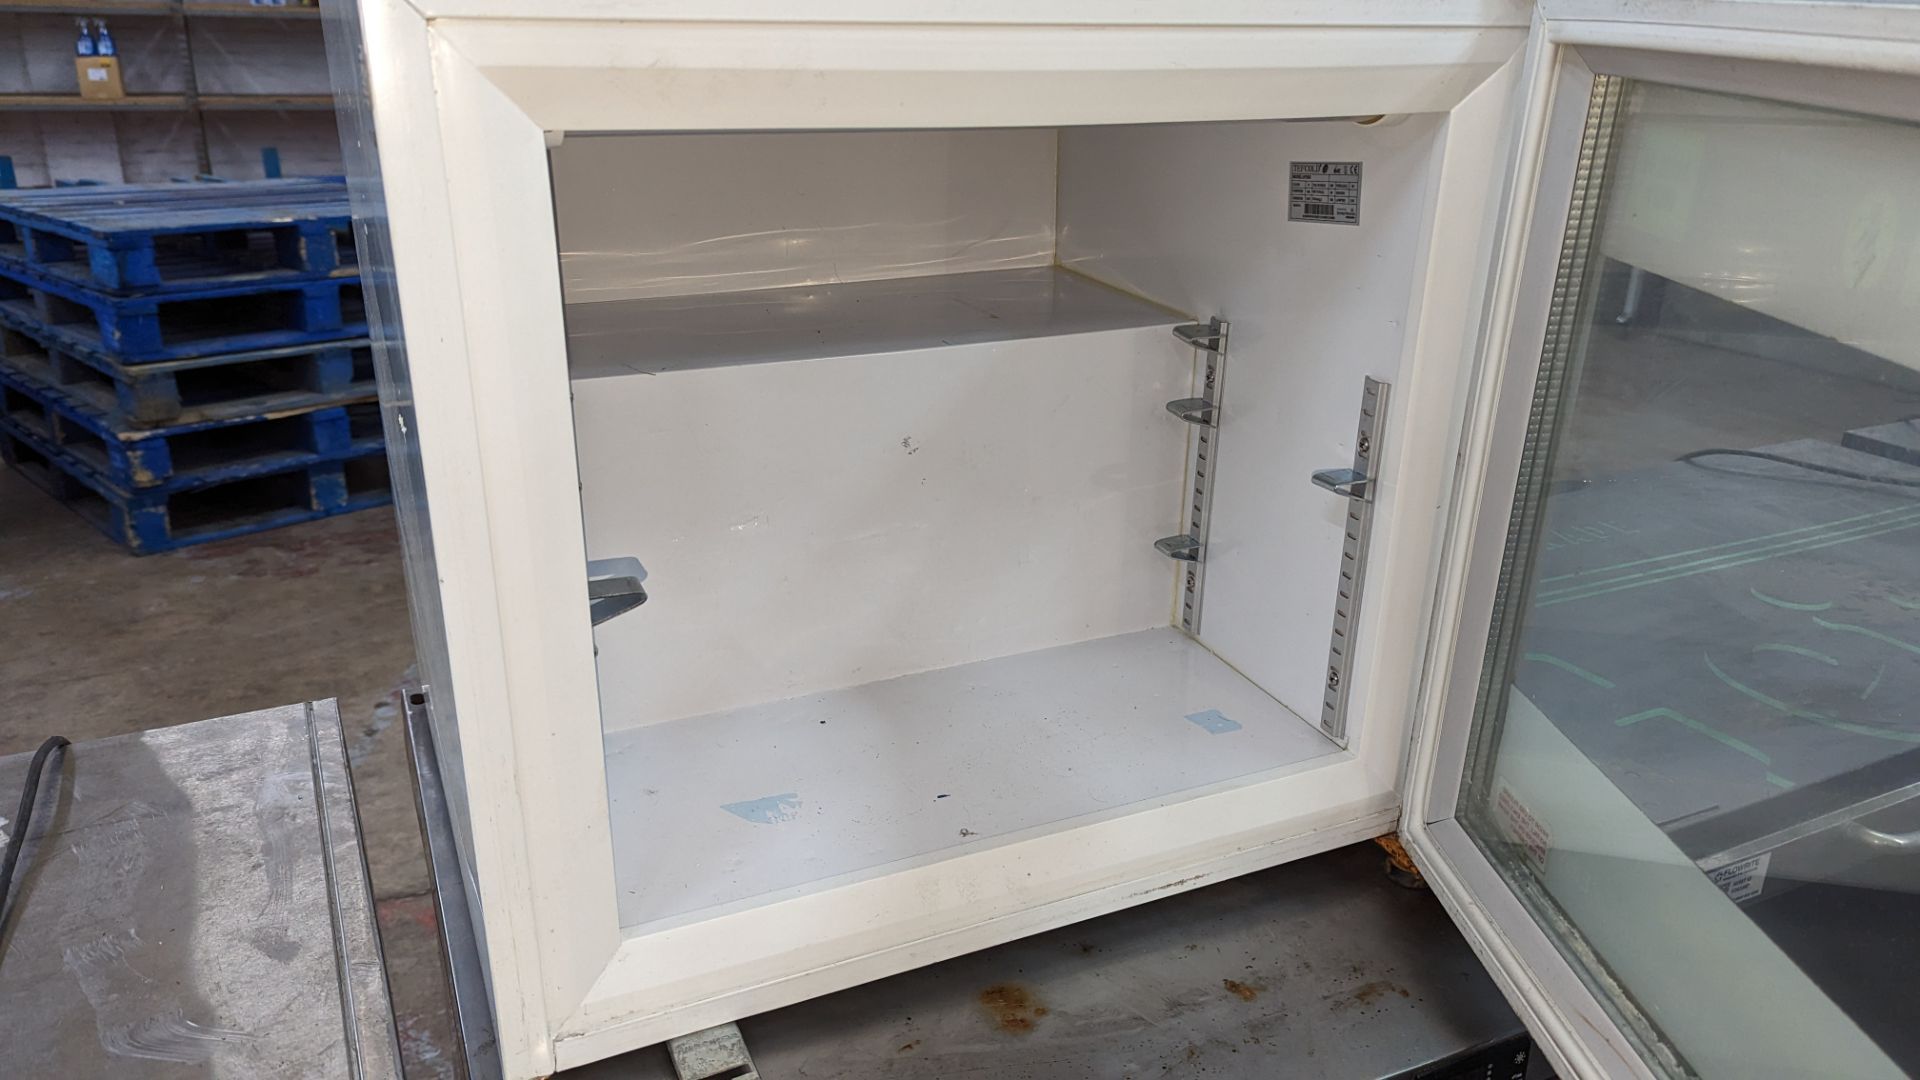 Countertop clear front freezer - Image 3 of 4